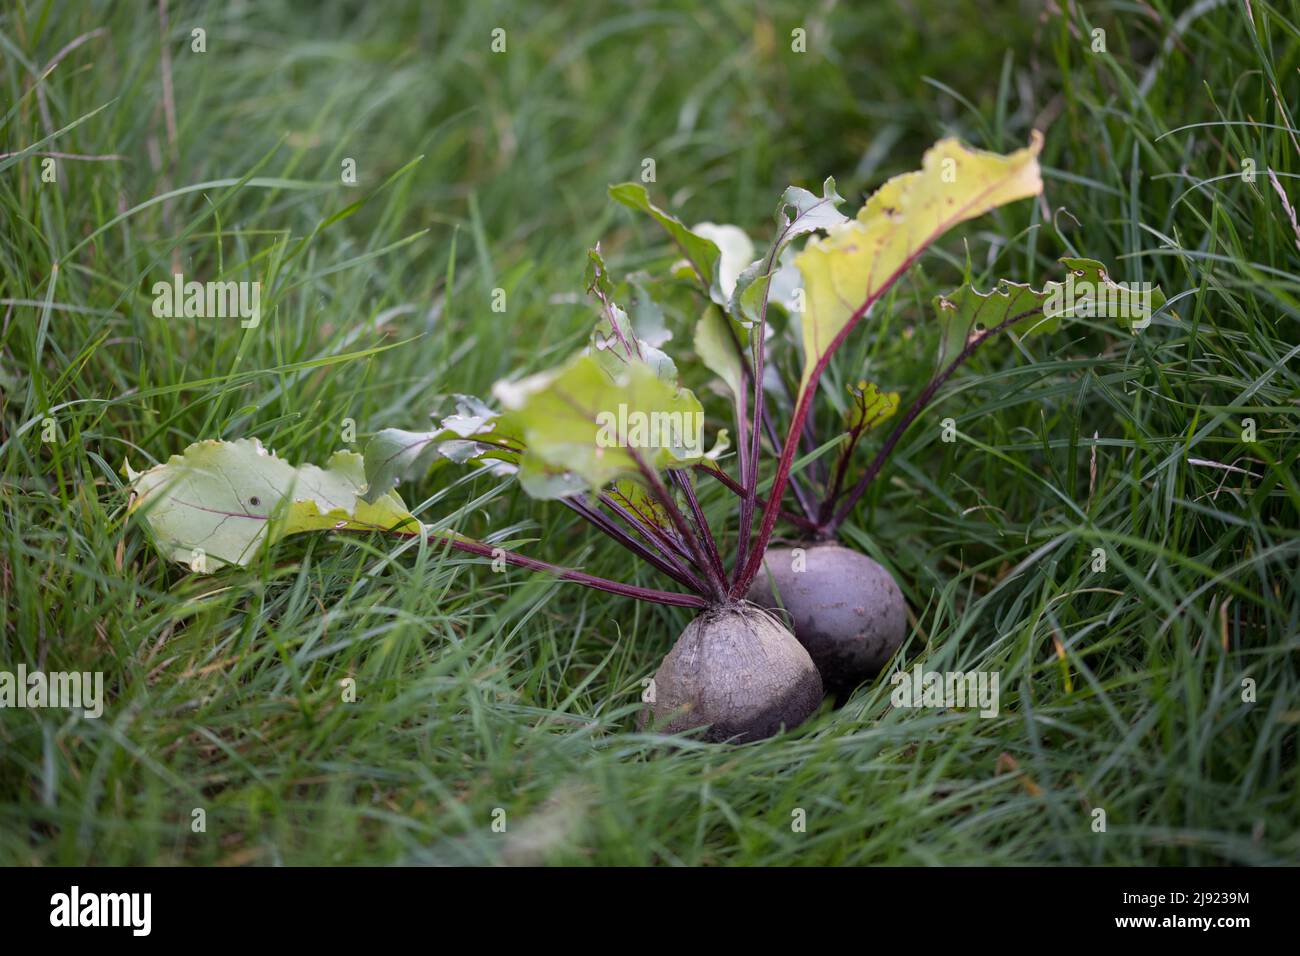 Beetroot (Amaranthaceae), lying freshly harvested in the grass in the garden, Velbert, Germany Stock Photo